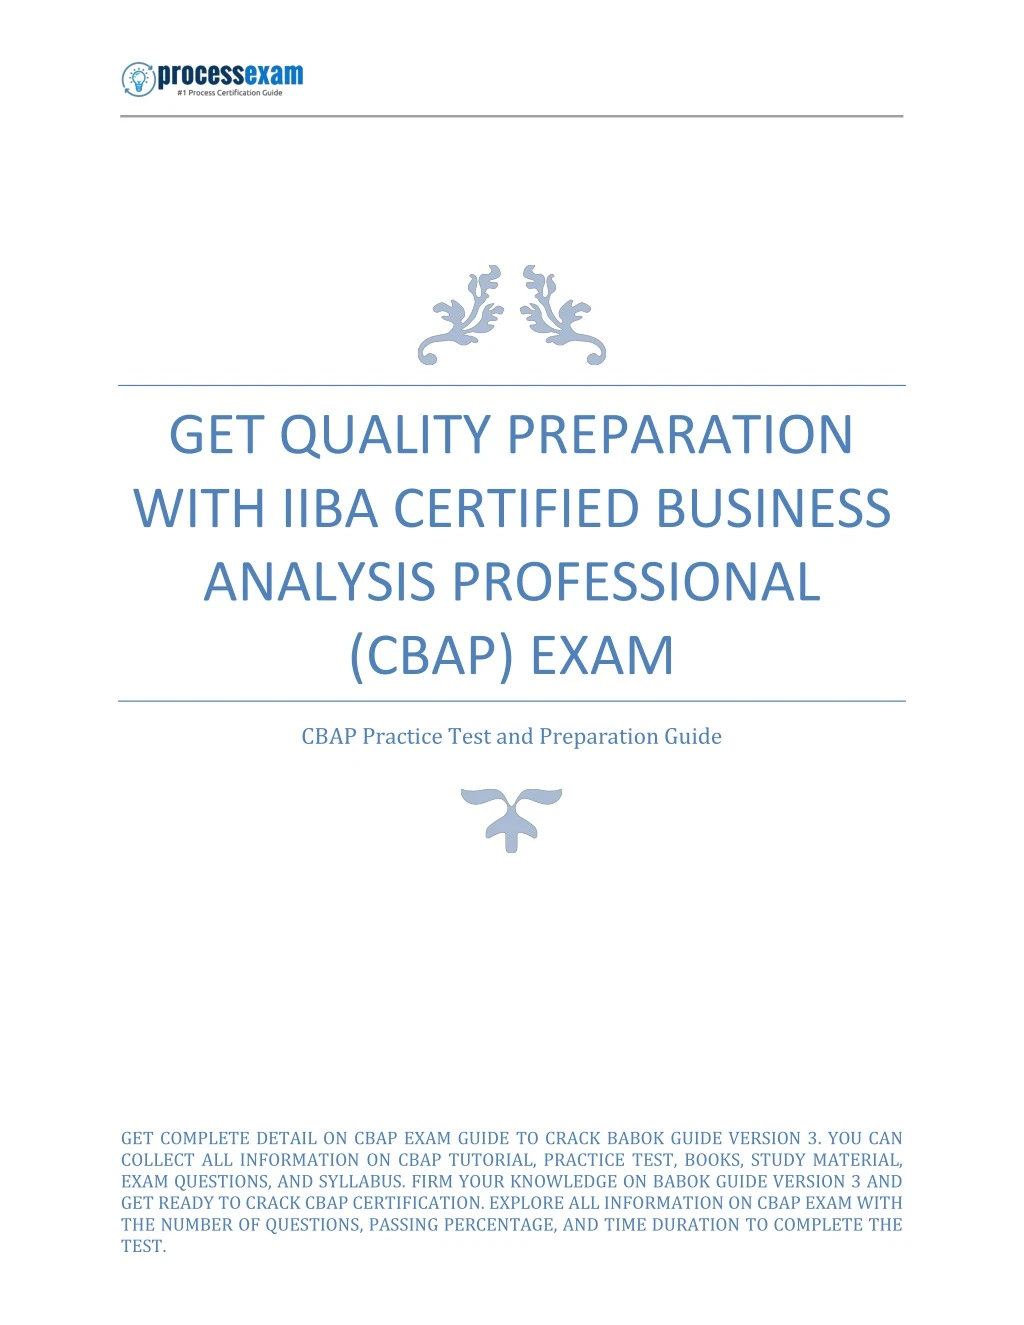 get quality preparation with iiba certified